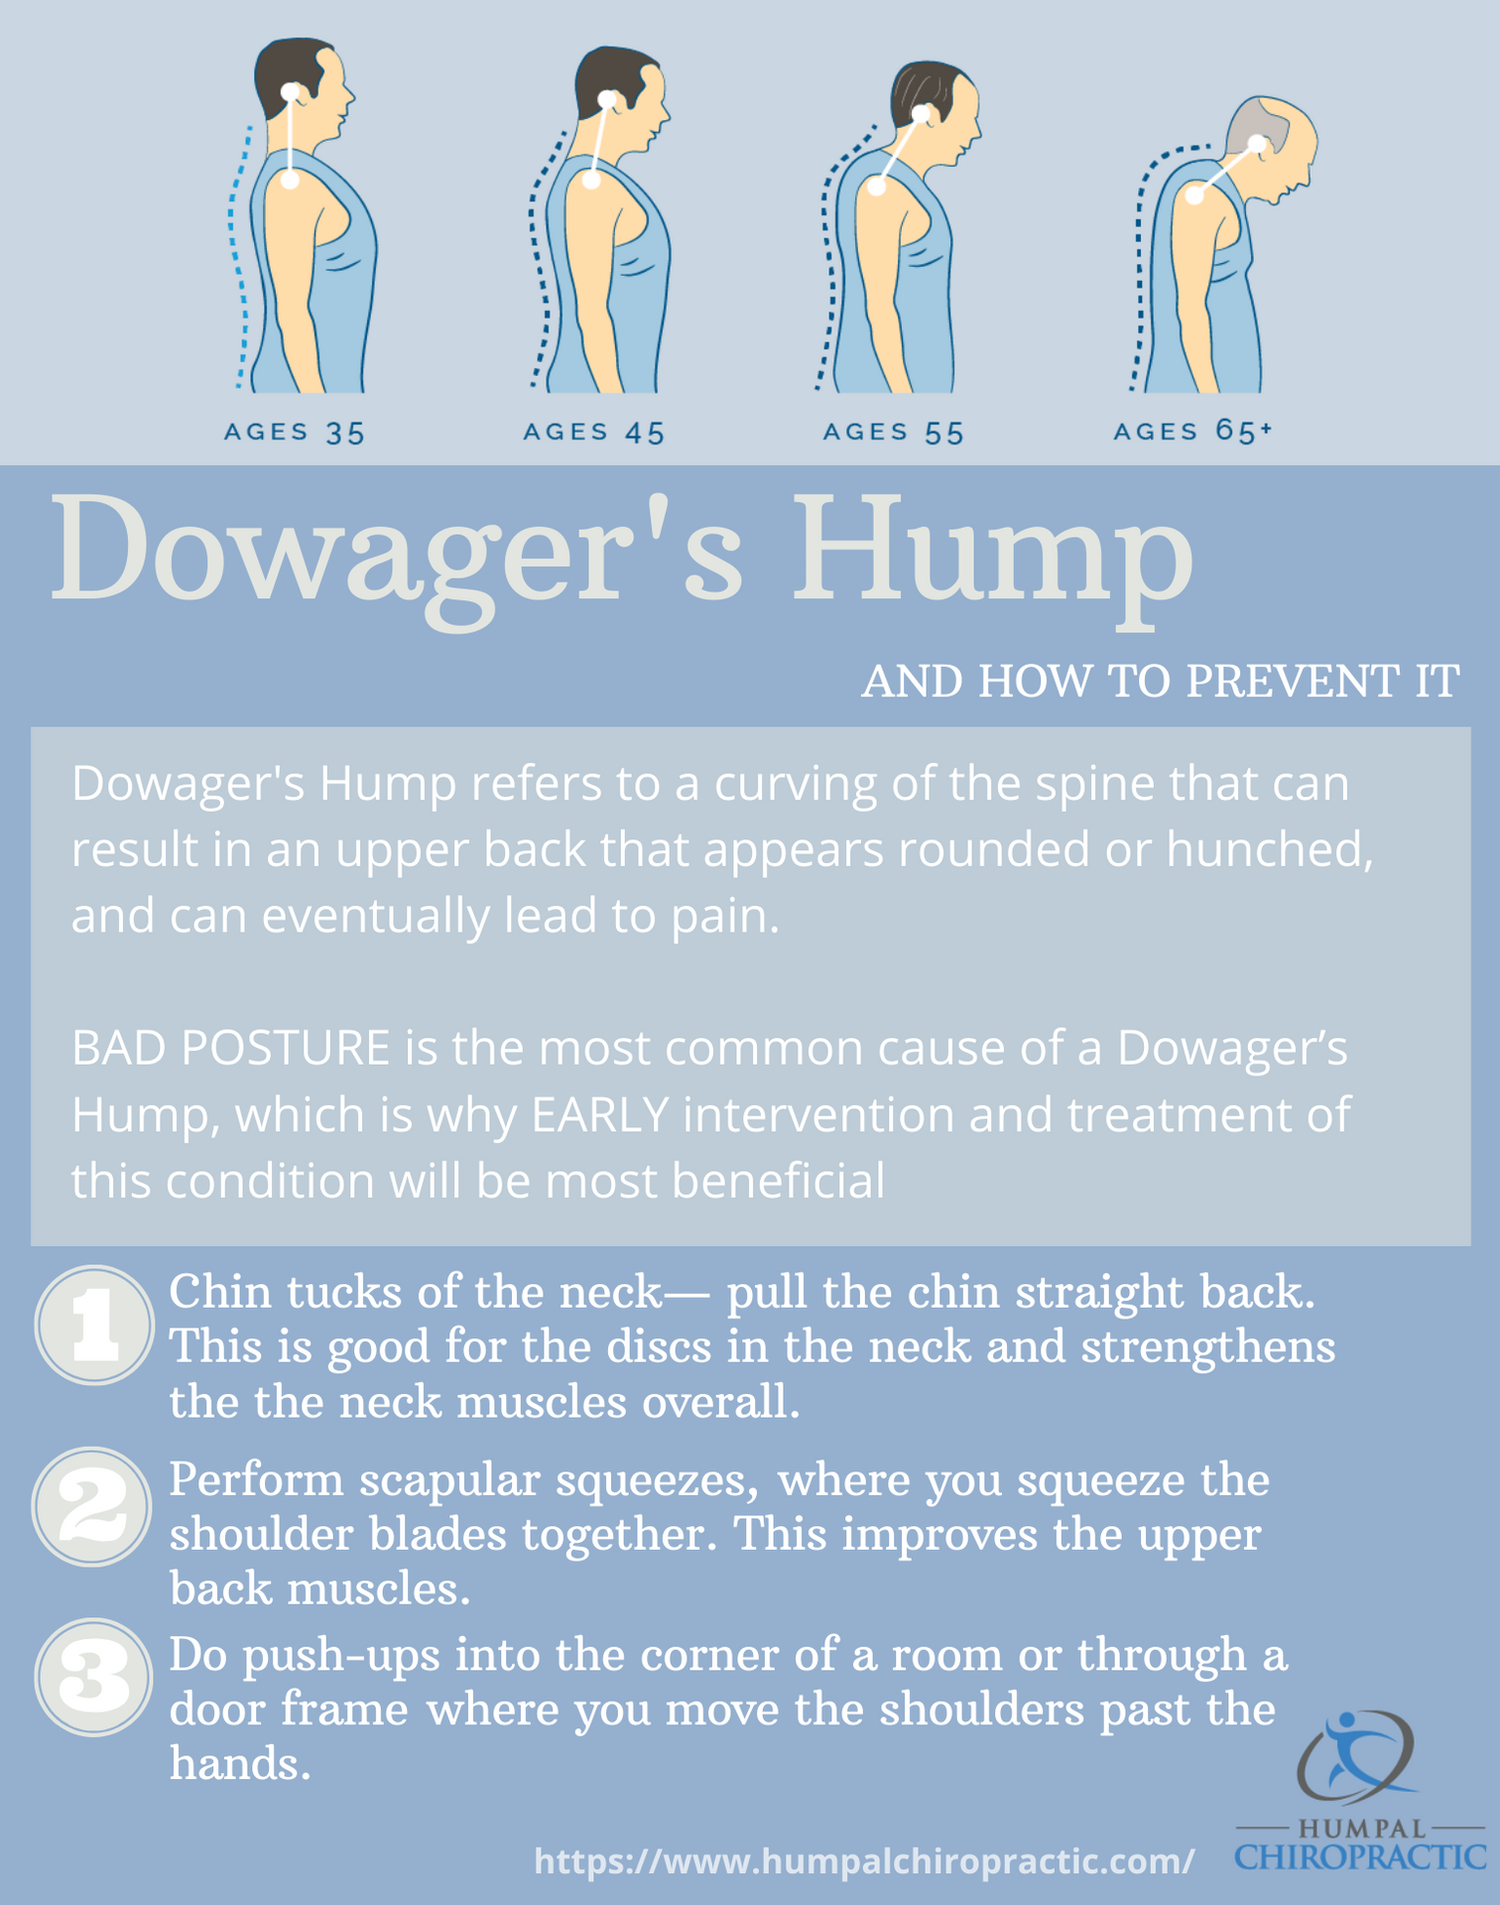 Humpal Chiropractic - Dowager's Hump: What is it? Can I prevent it?